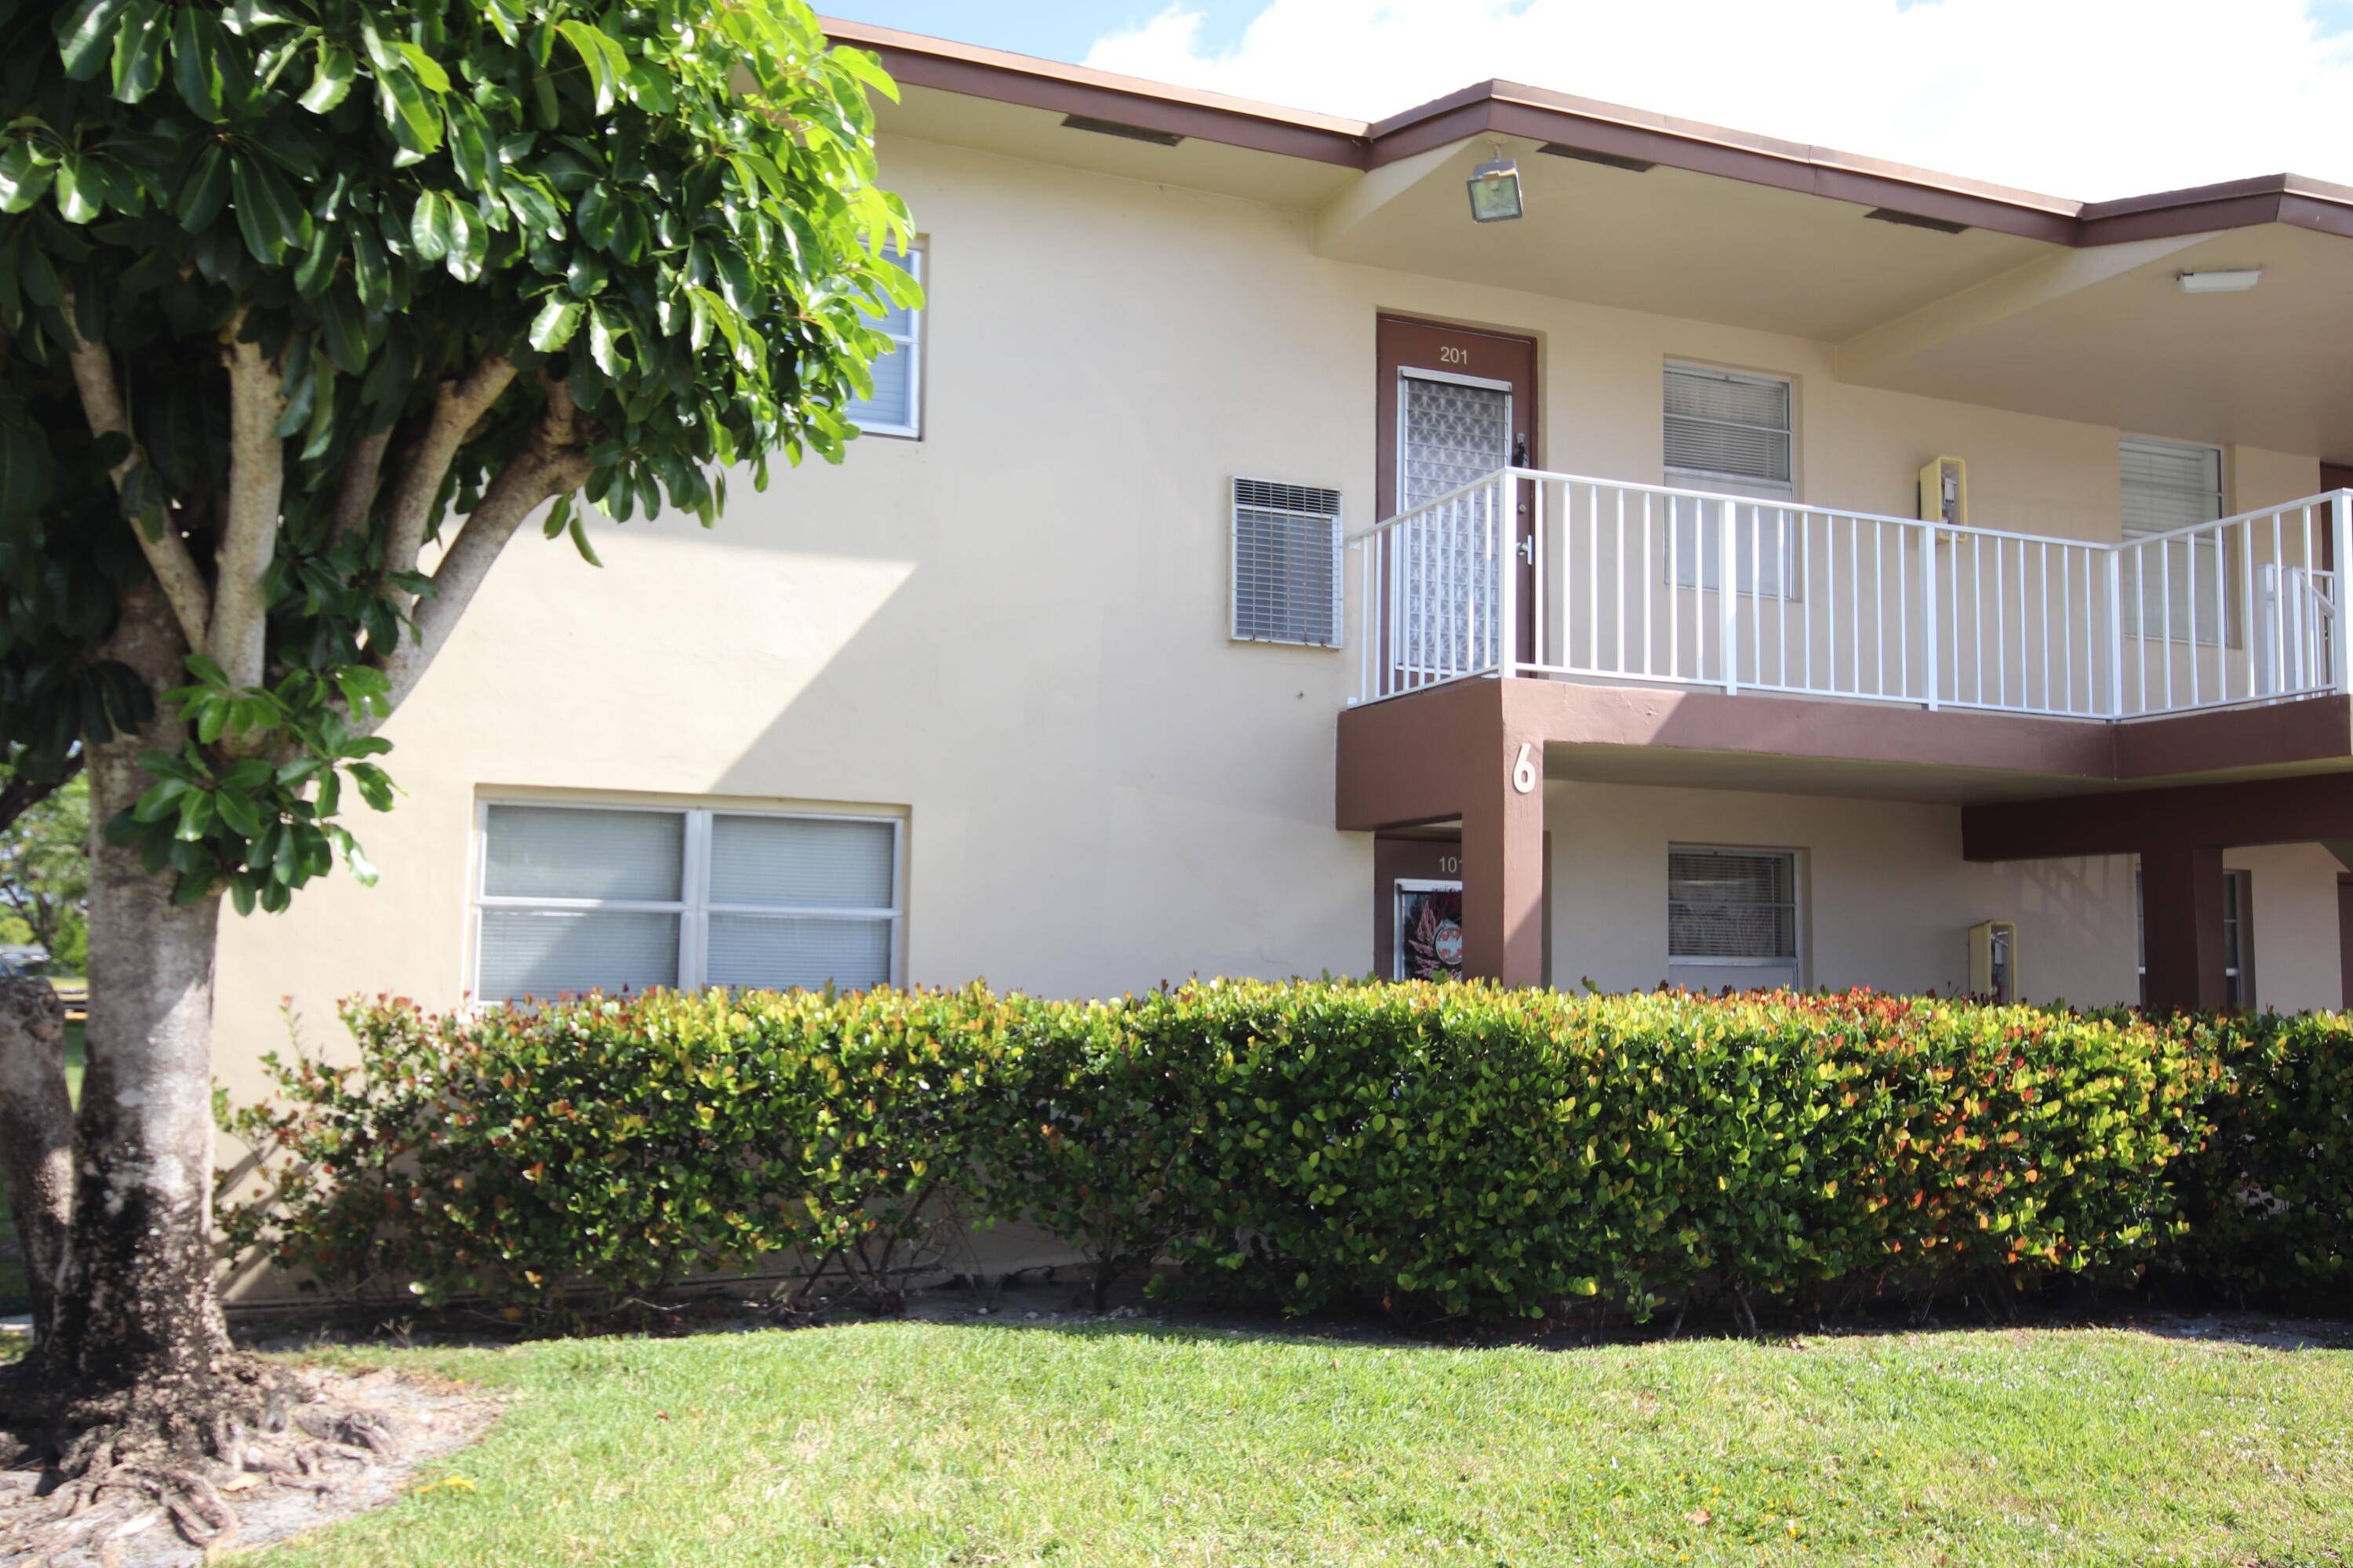 Fully Furnished move in ready 2 bedroom, 2 bath corner unit condo in well maintained Oriole Gardens featuring windows in all rooms for a bright and airy living, tiled throughout, ...